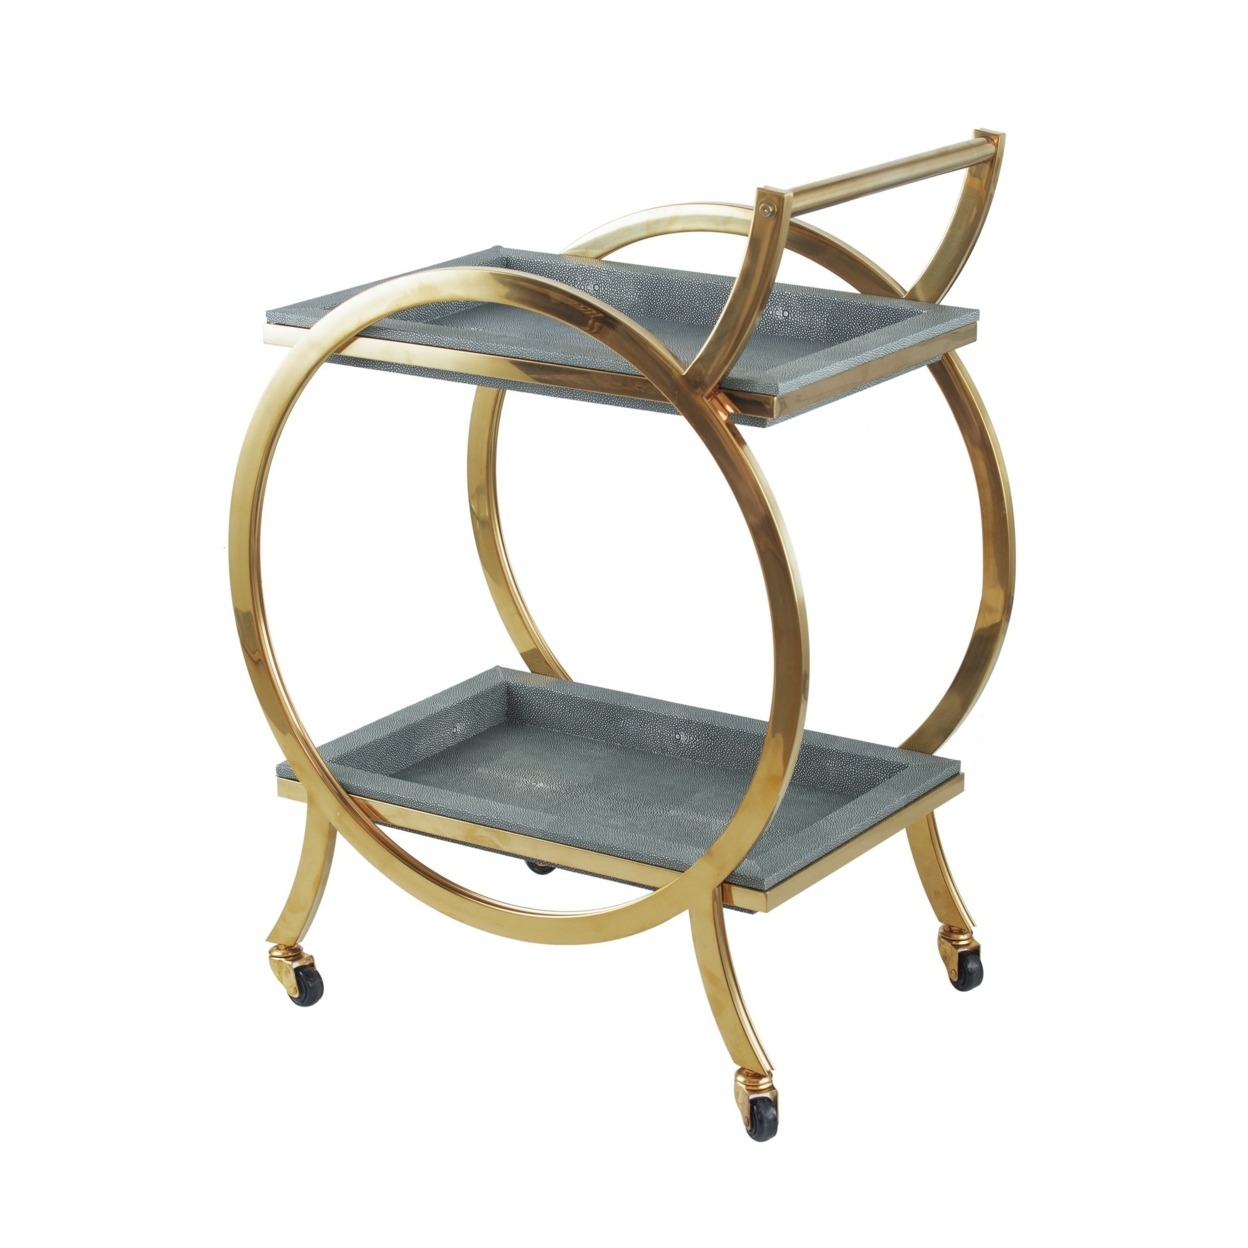 Sia 34 Inch Rolling Bar Cart, Round Steel Frame, Removable Trays Gray, Gold, Saltoro Sherpi